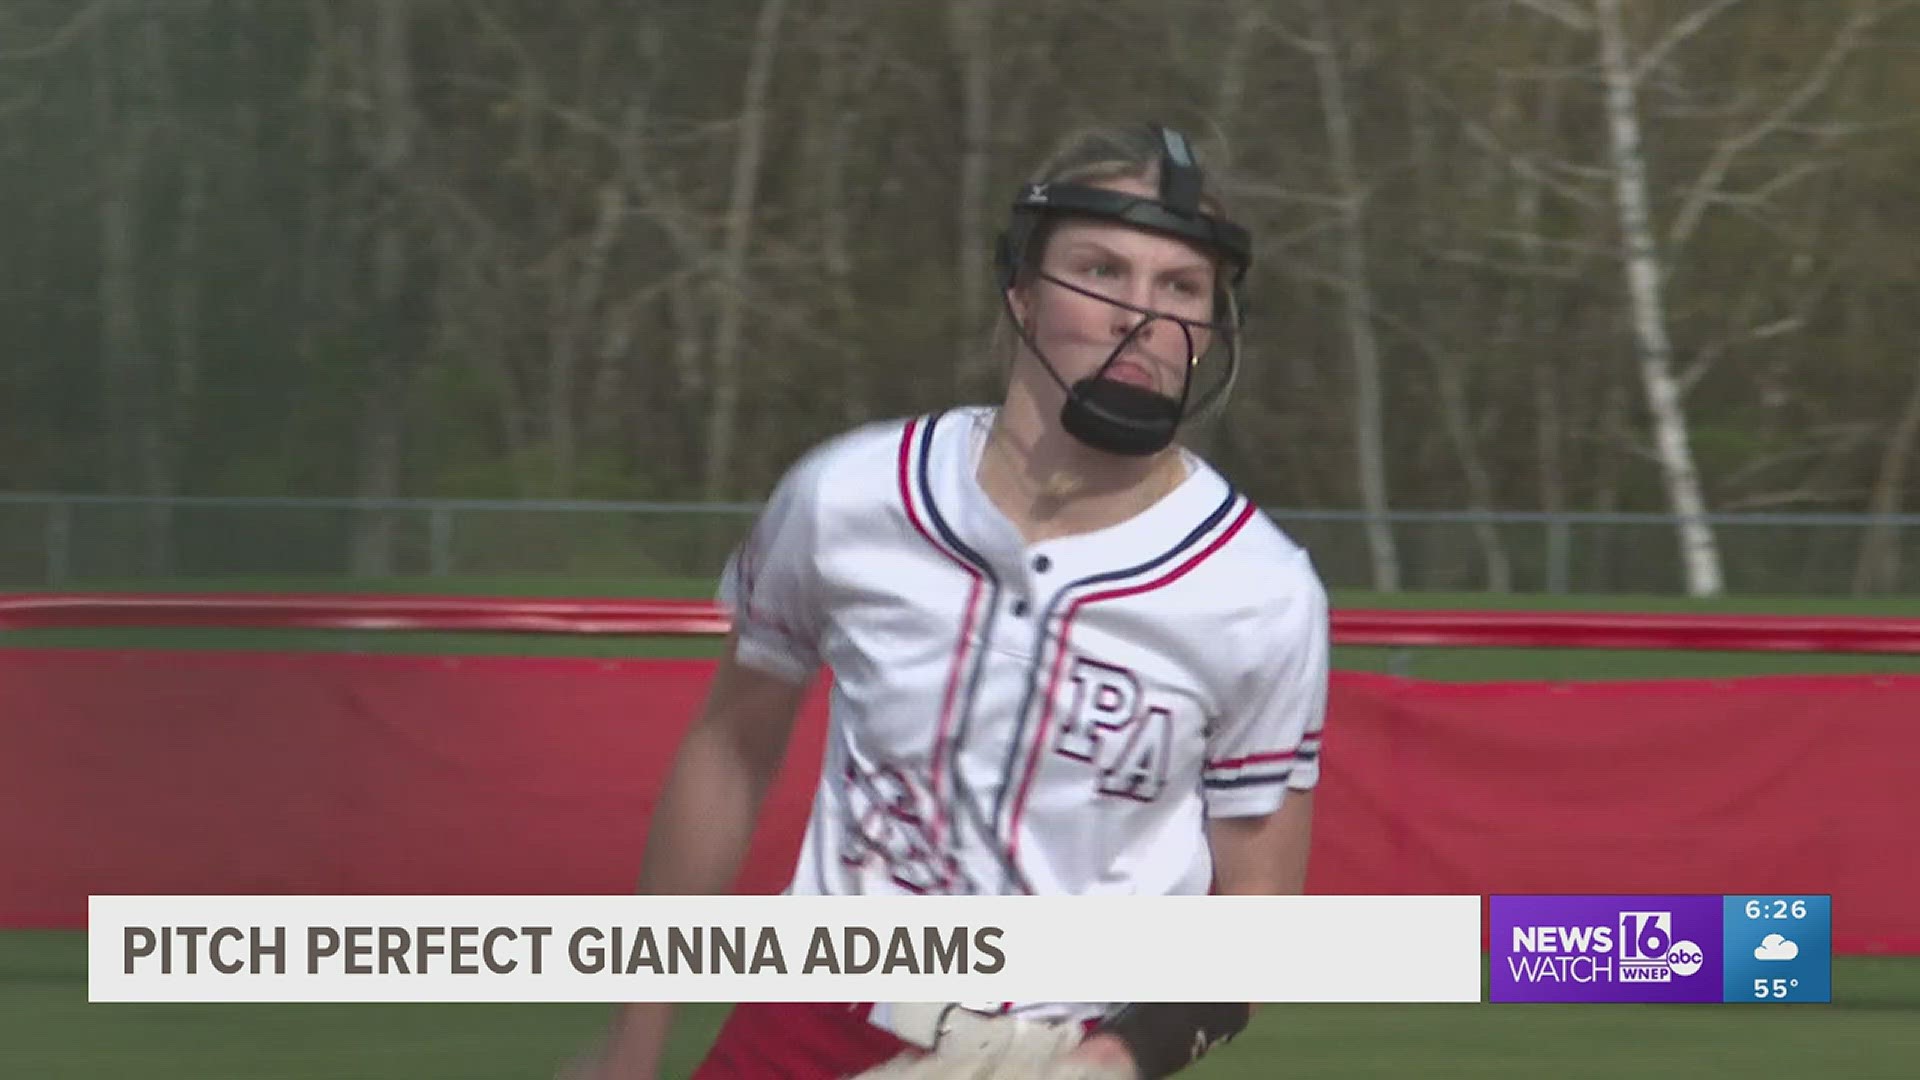 Adams has pitched four consecutive games with either a no-hitter or perfect game